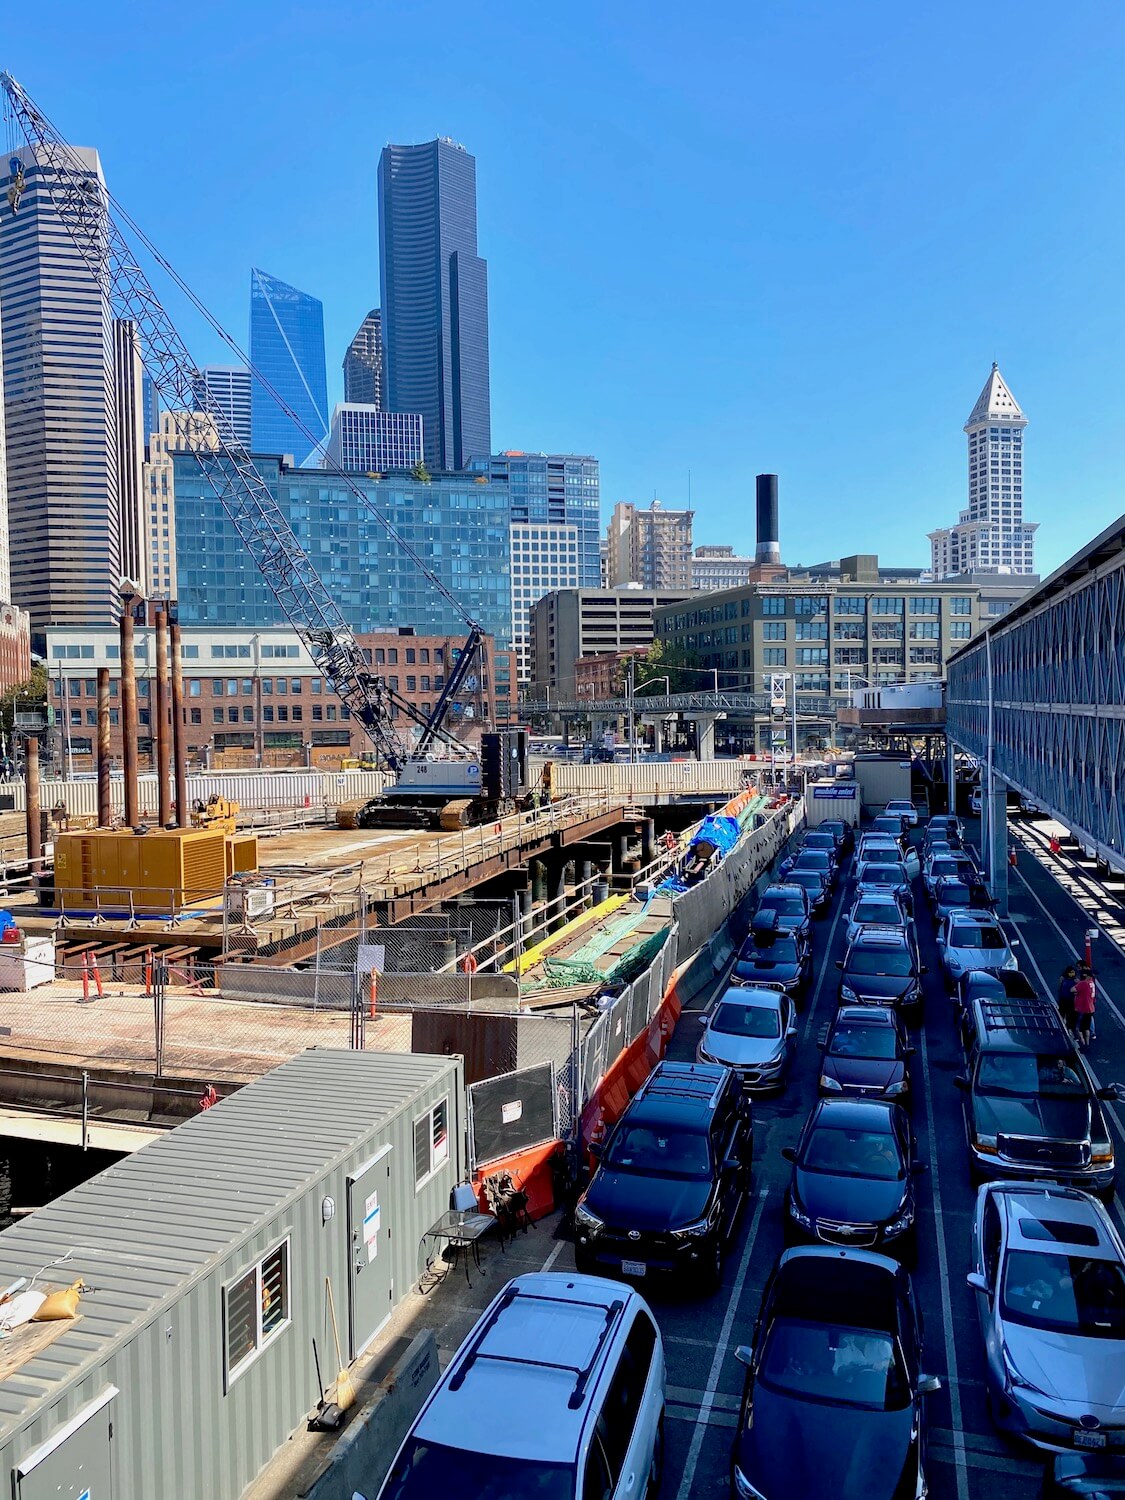 The Coleman Dock in Downtown Seattle has cars lined up to drive onto a Washington State Ferry. There are three lanes of cars and they are sandwiched between heavy construction and the long passenger walkway out to the boats. In the background the Columbia Center rises high into the Seattle skyline with iconic Smith Tower with it's pointed triangle white roof.